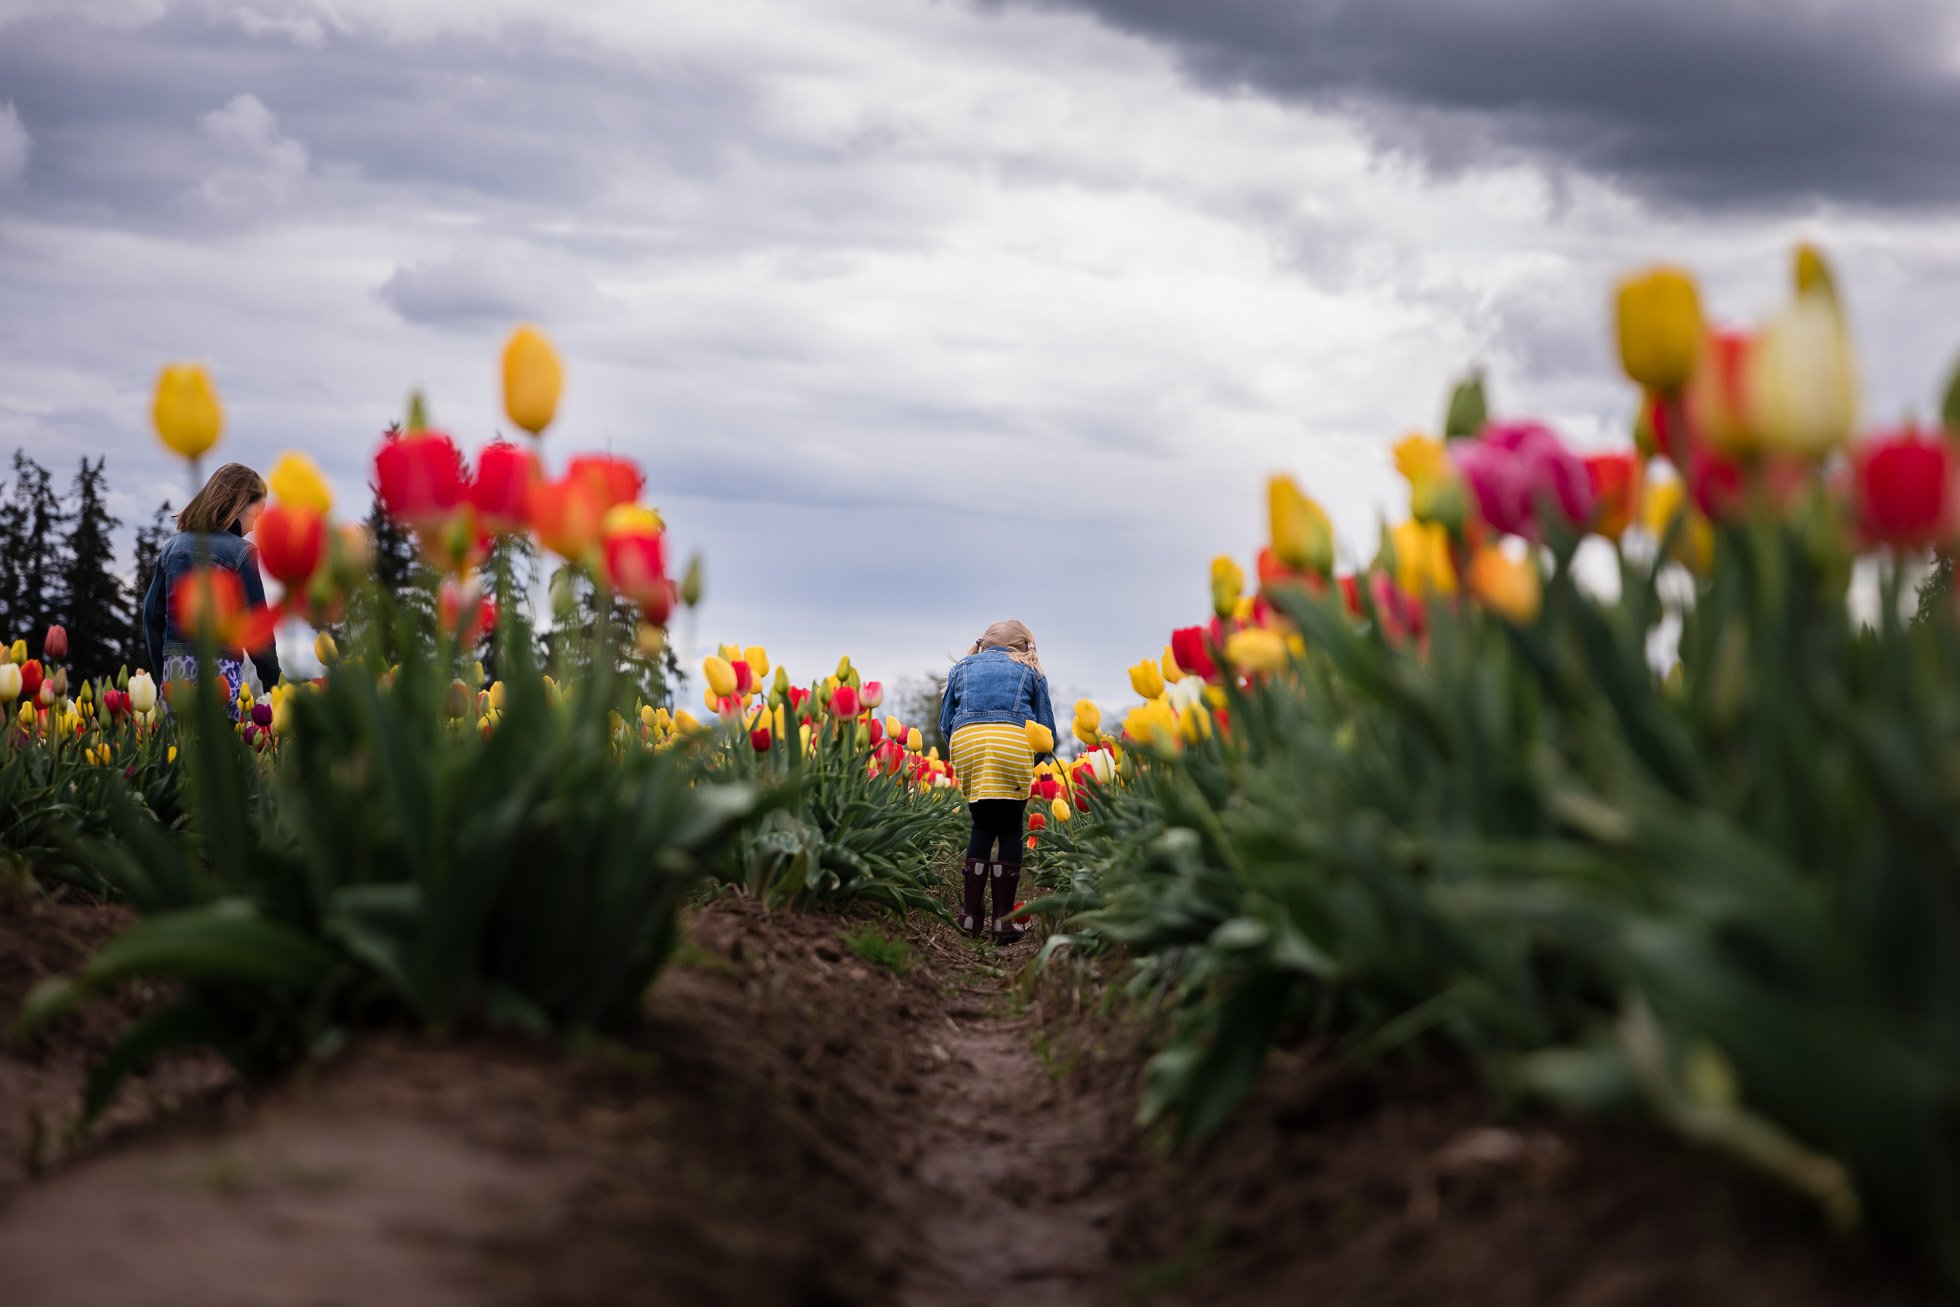 girl in the tulip field by rebecca hunnicutt farren premiere lifestyle childrens and family photographer in portland oregon and vancouver washington